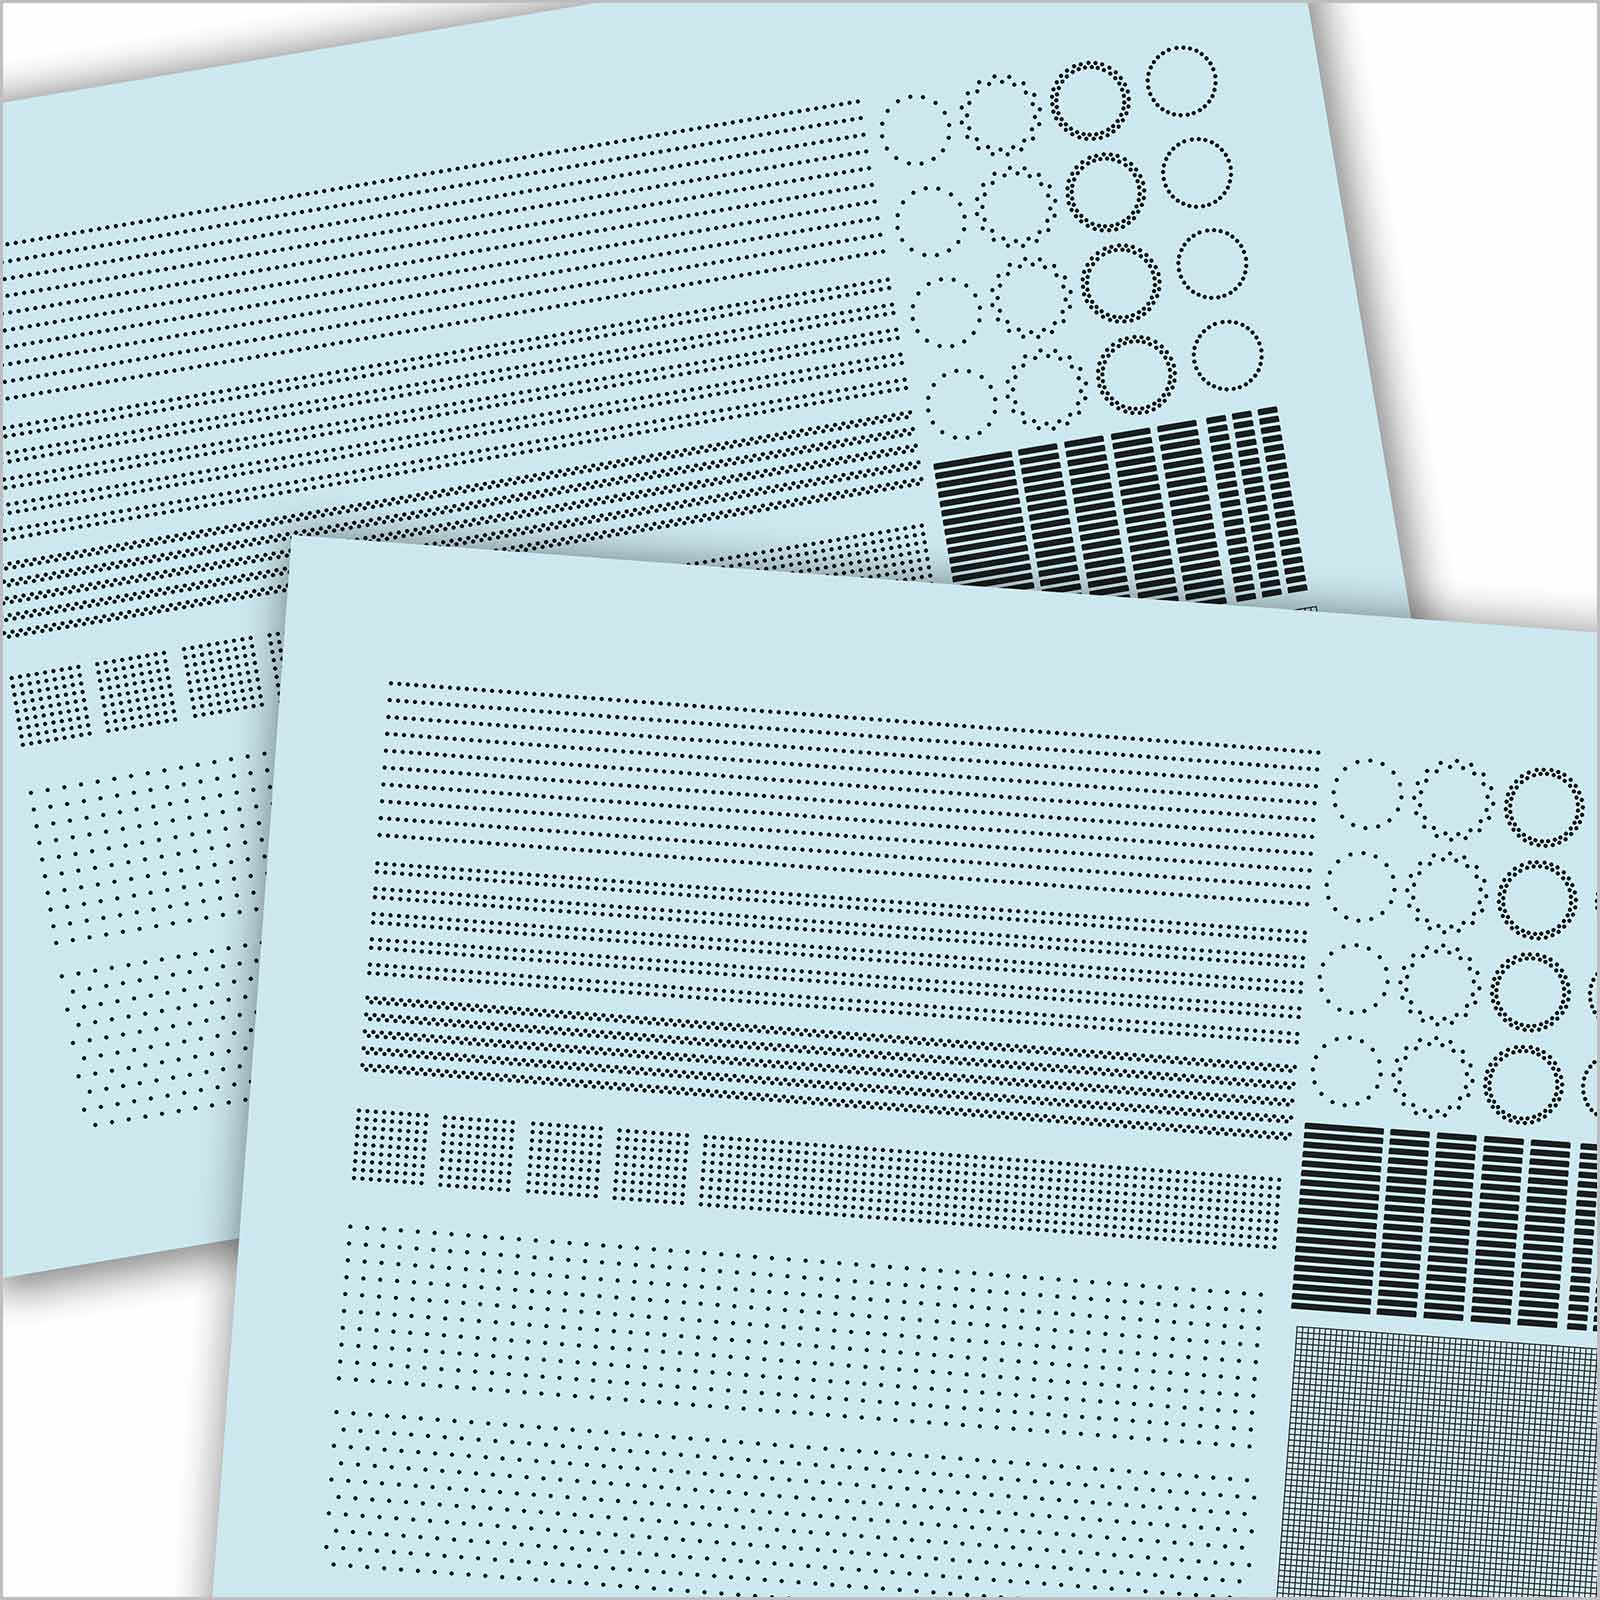 O scale decals with raised 3D rivets and other surface details - Micro - Mark Decaling